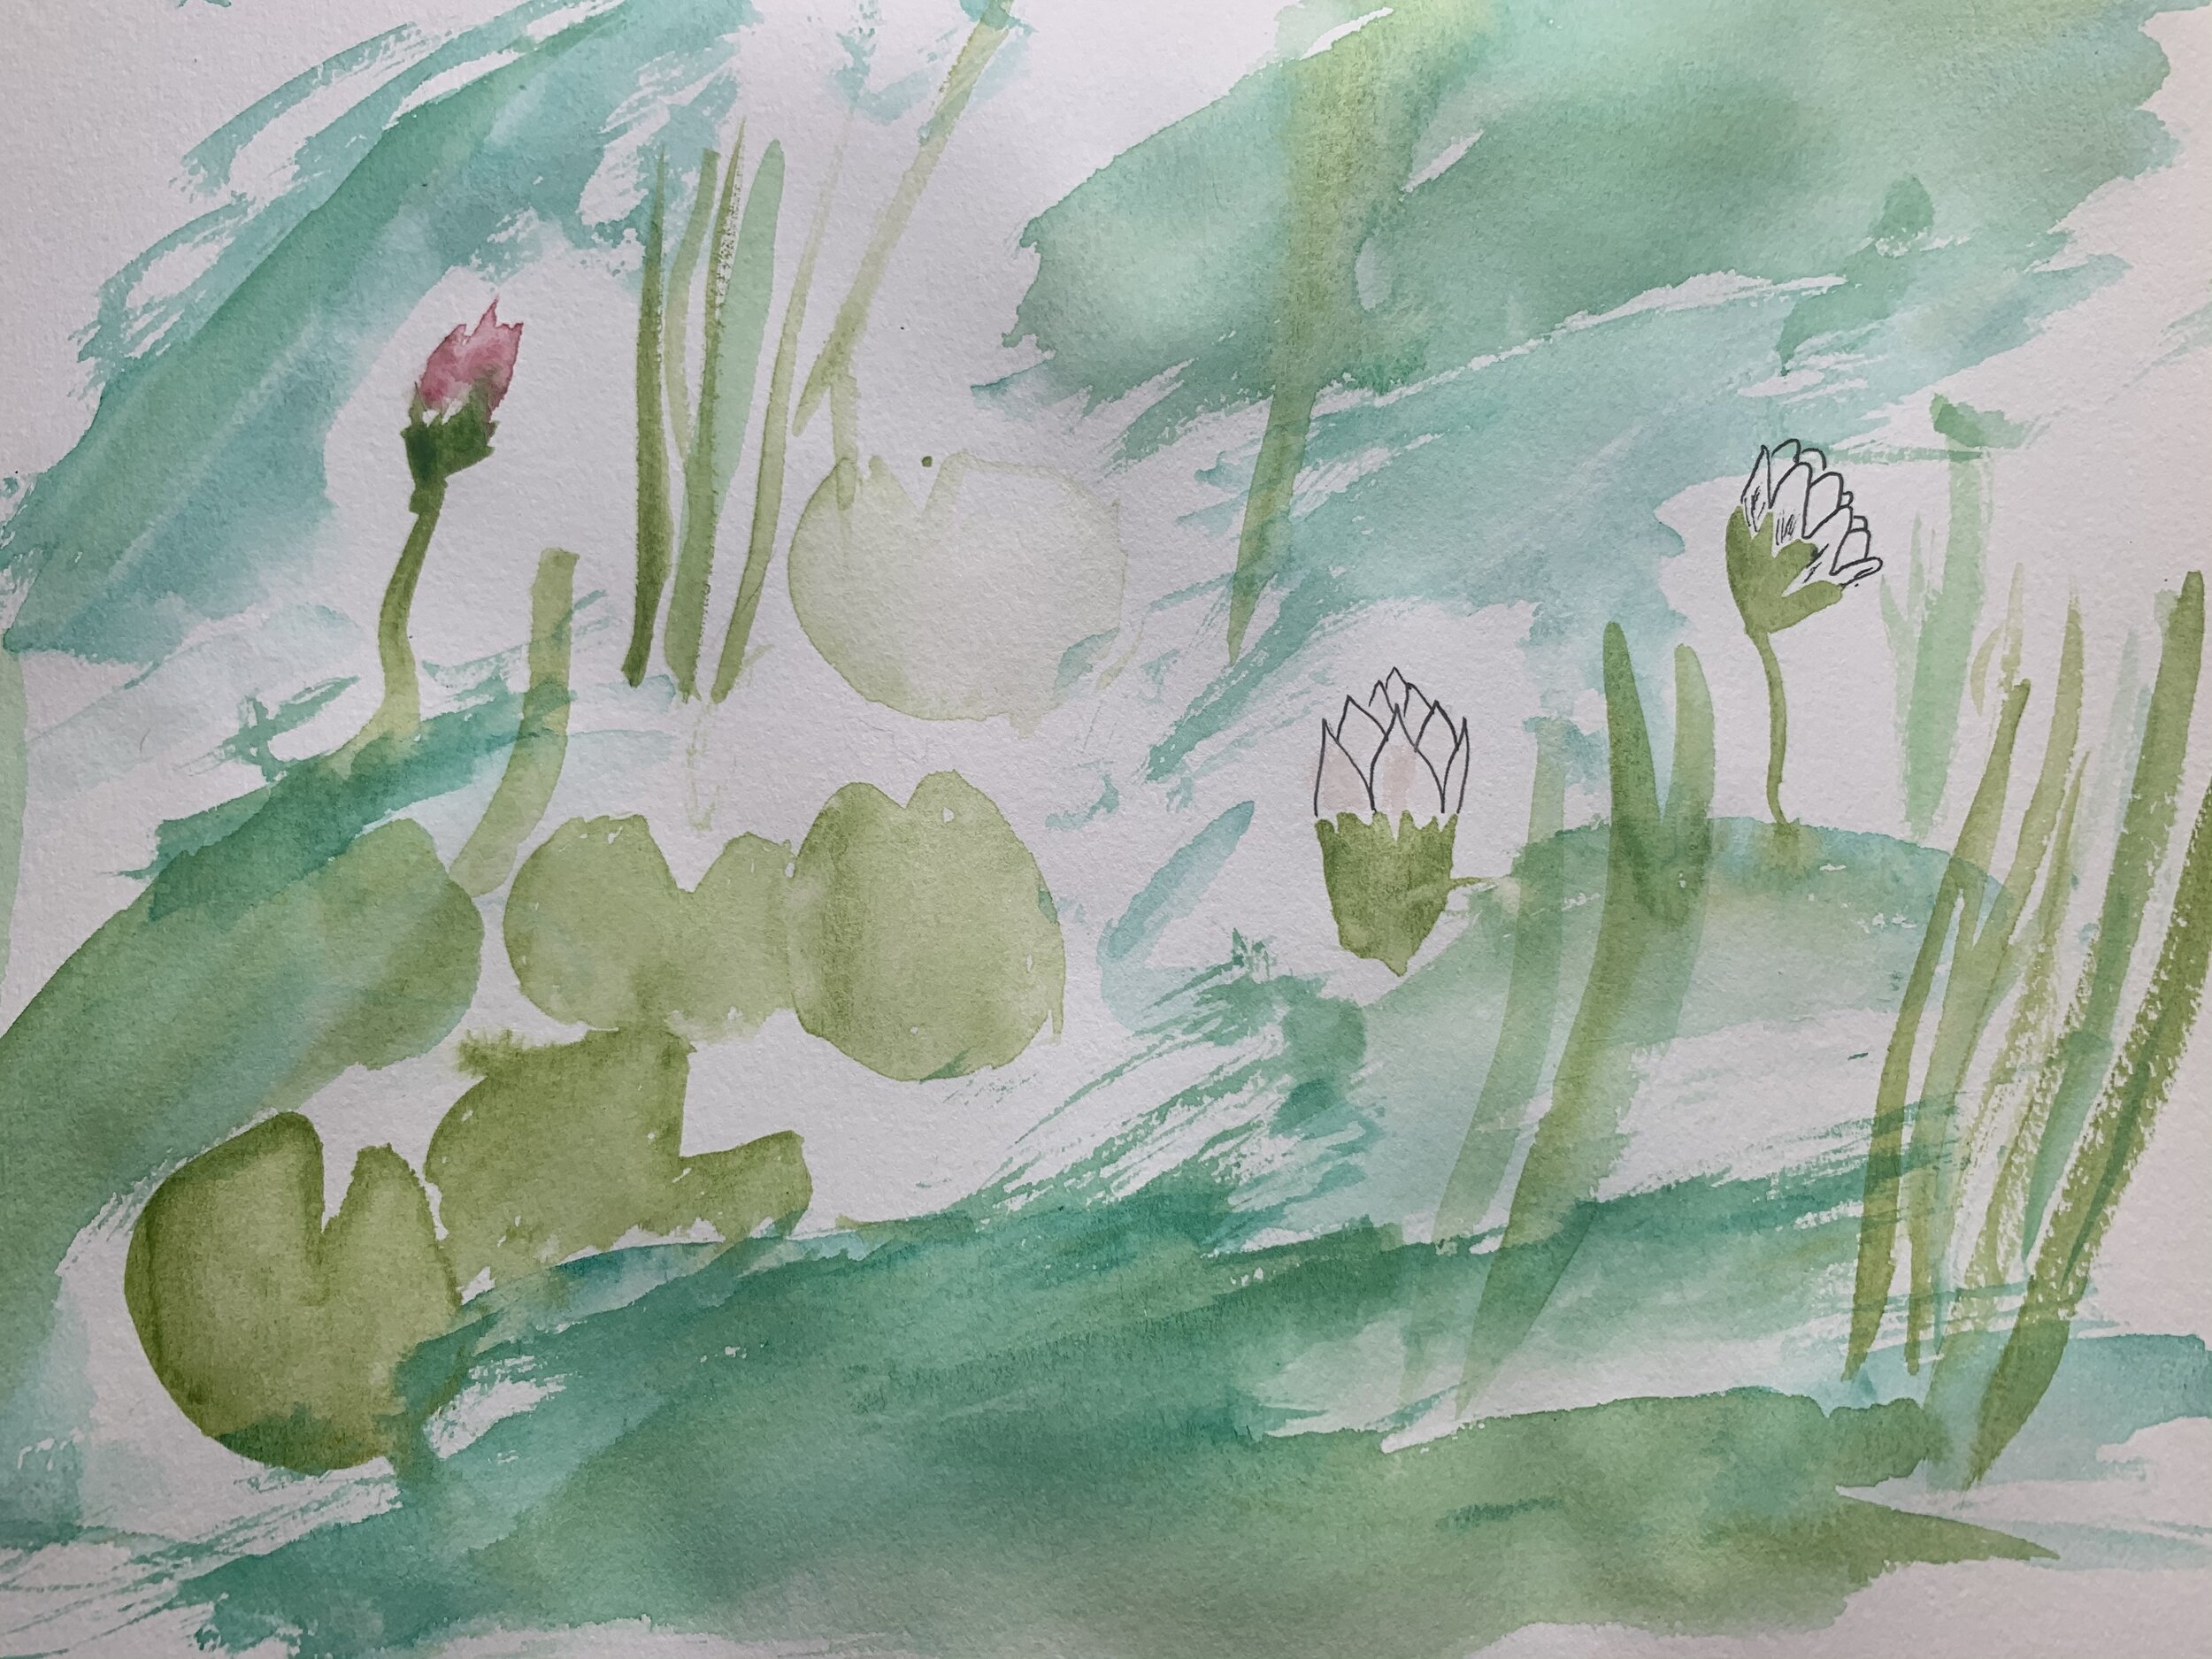 L is for Lily Pads, by Allegra